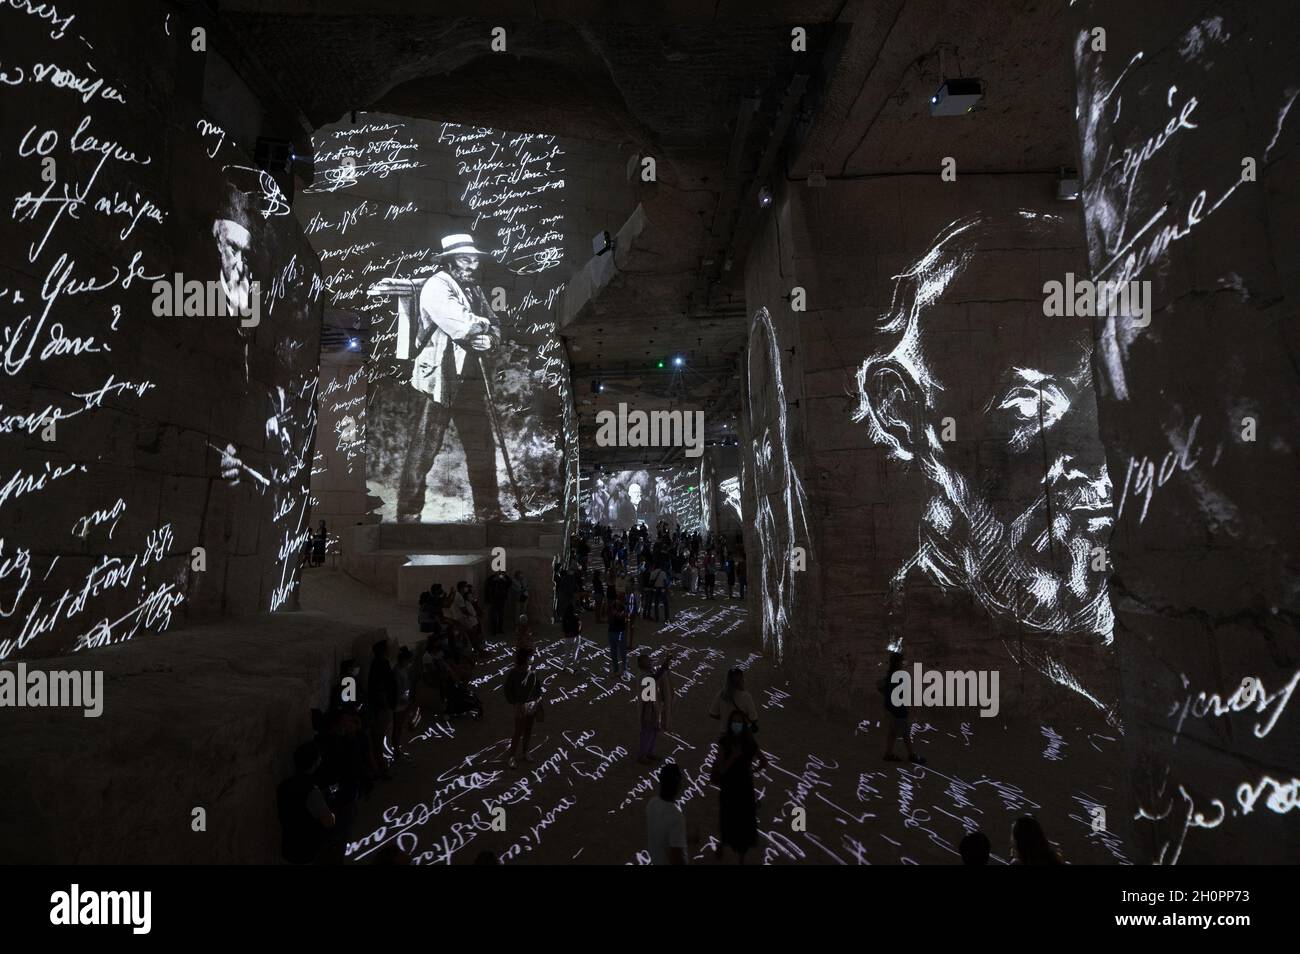 Les Baux de Provence (south eastern France): “Les Carrieres des Lumieres” holds immersive digital exhibitions devoted to major artists produced by Cul Stock Photo